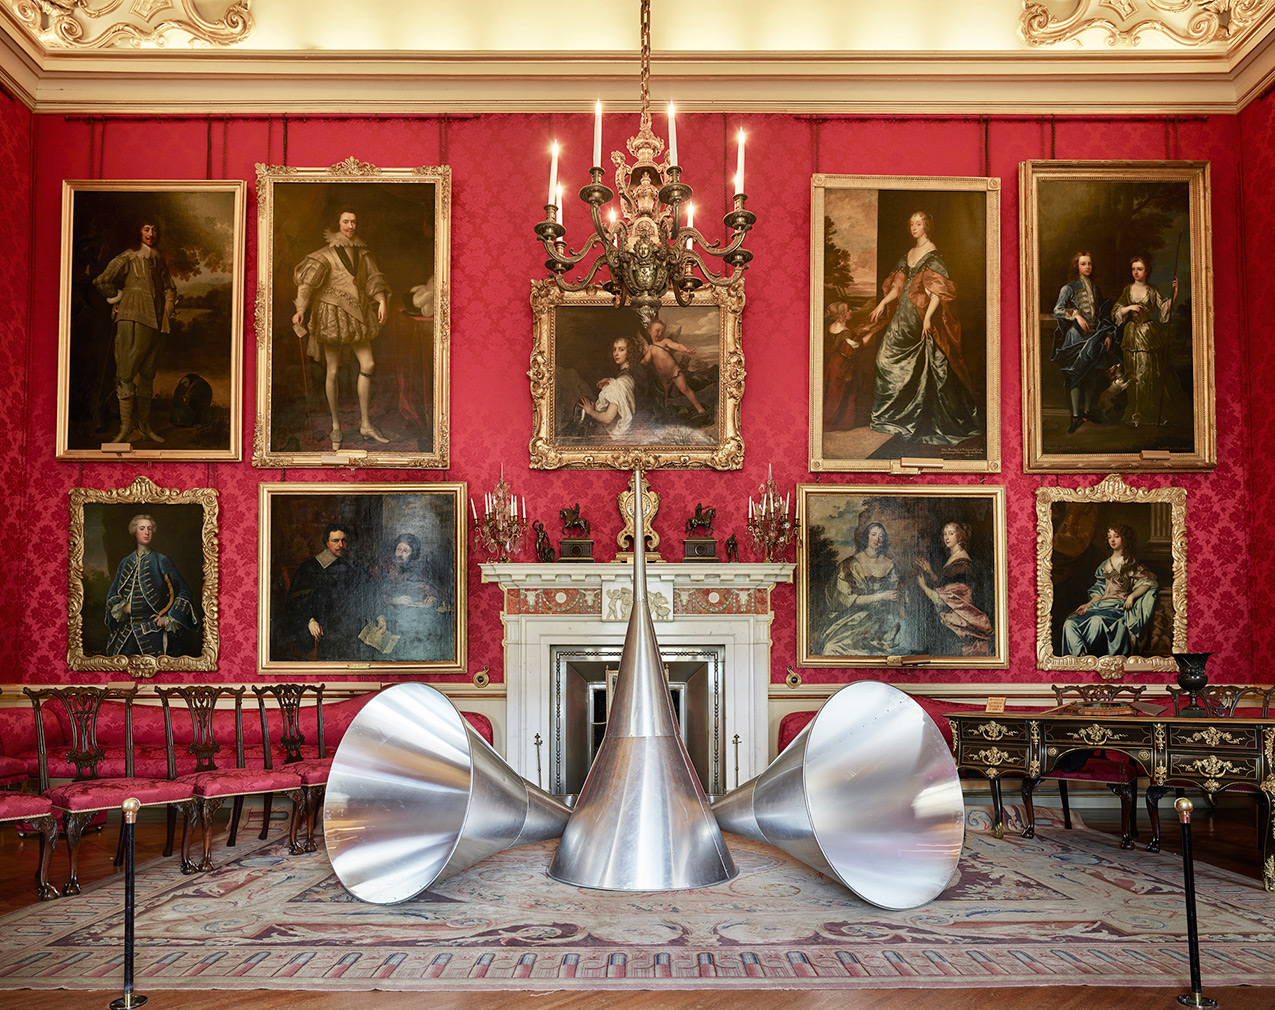 'The Trumpets of judgement' (1968-1986) by Michelangelo Pistoletto. Photography: Tom Lindboe / courtesy:Blenheim Art Foundation